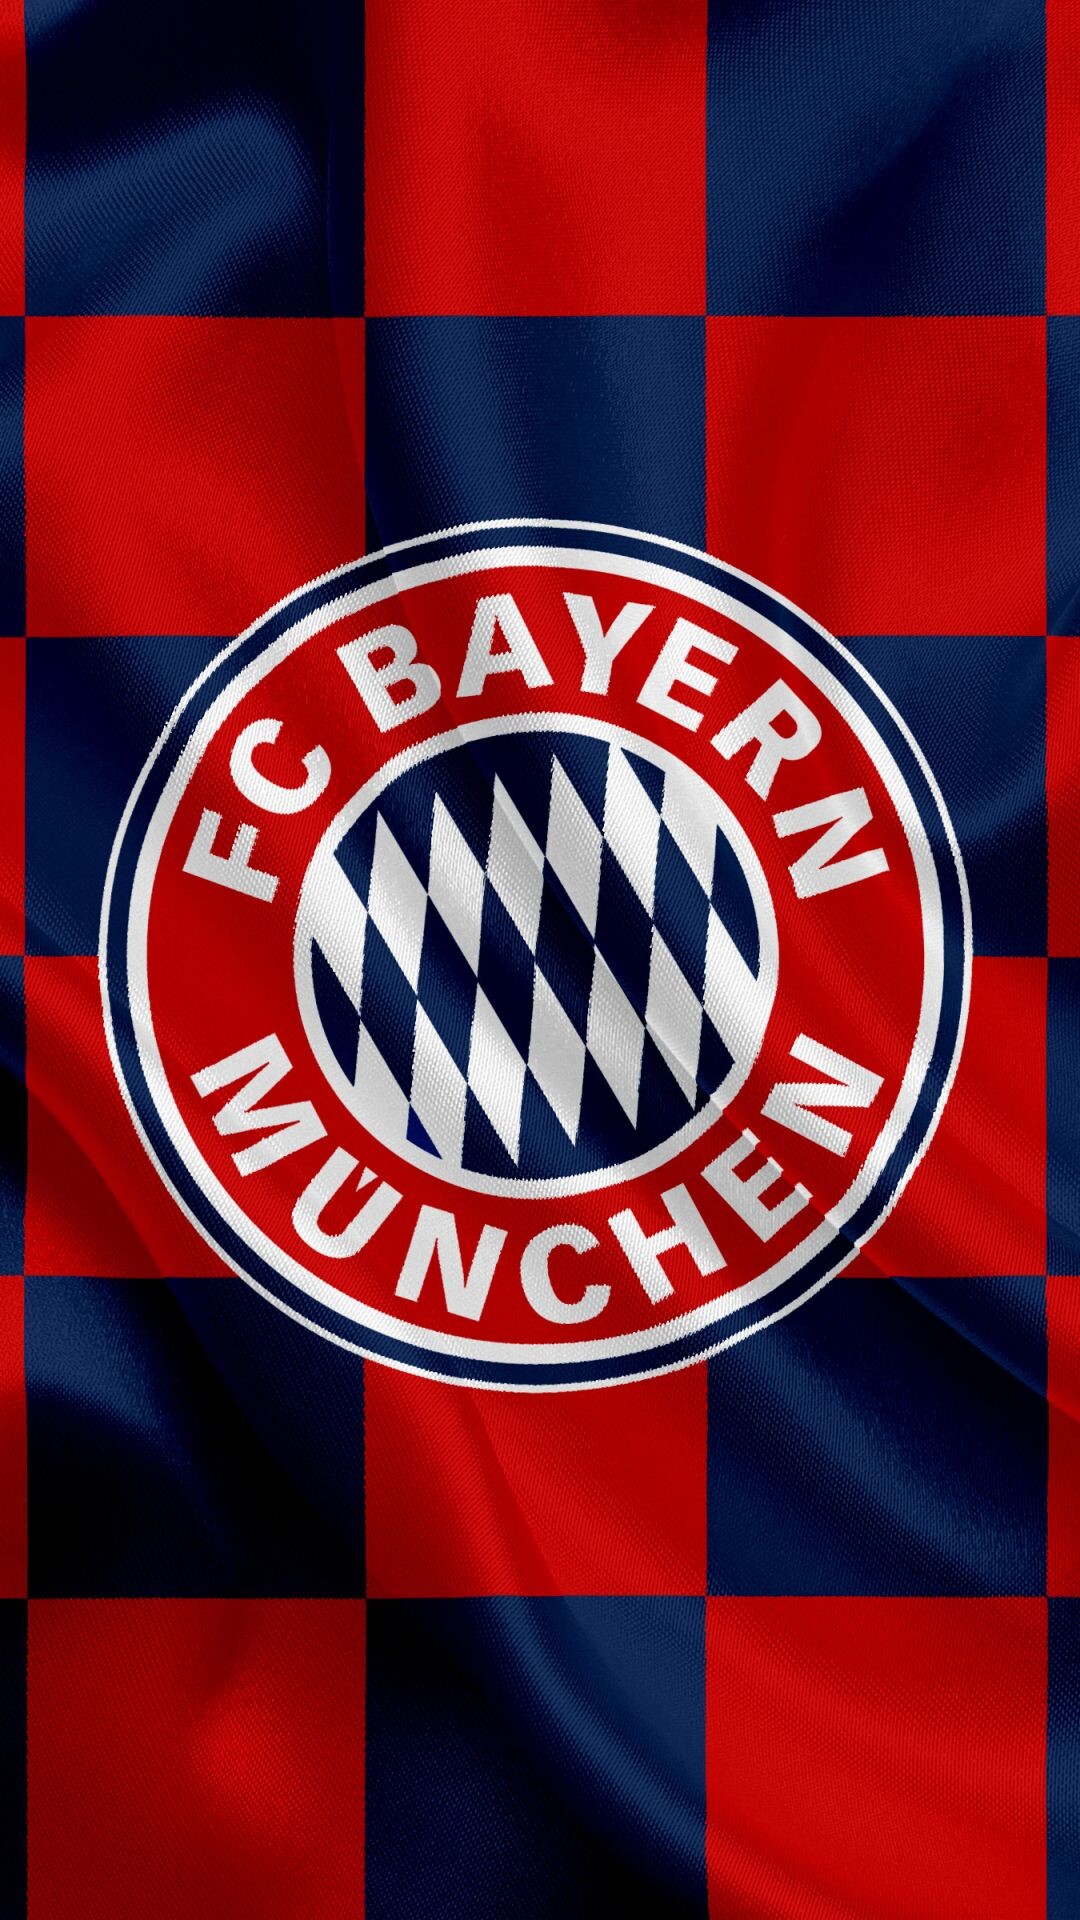 Germany Soccer Team: FC Bayern Munich, The Reds, The most successful club in German football history. 1080x1920 Full HD Wallpaper.